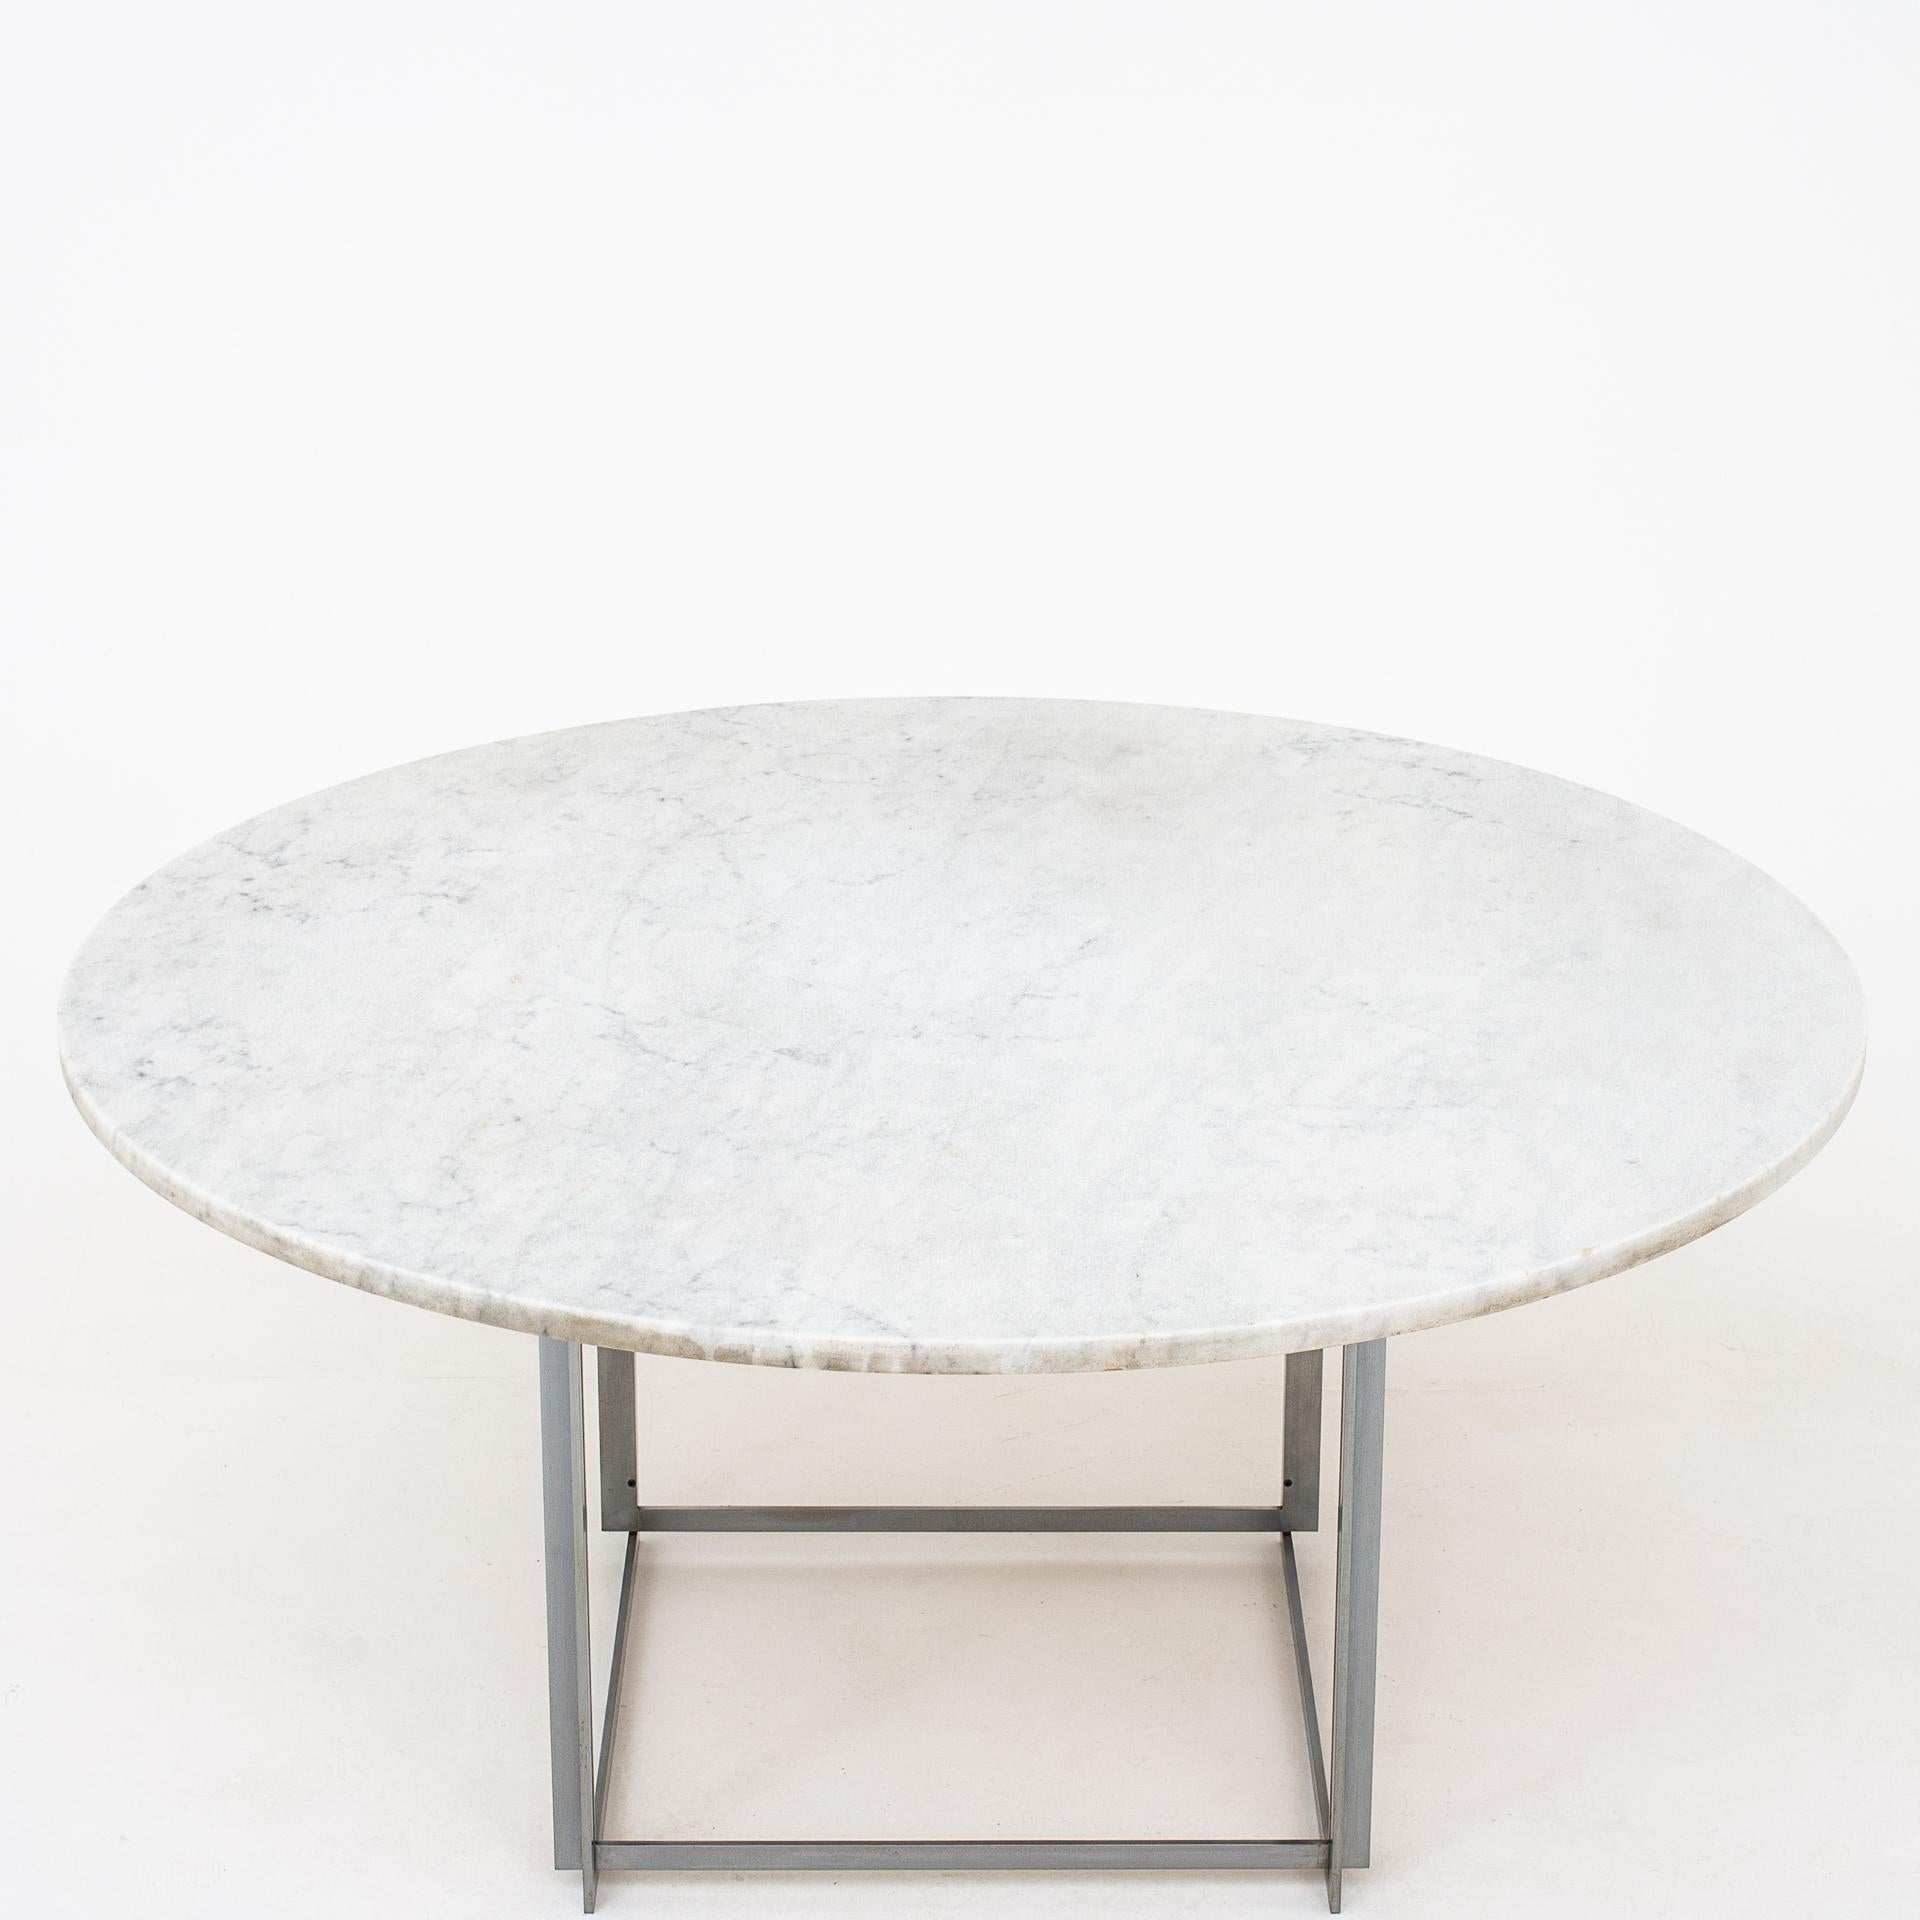 Patinated PK 54 Dining Table by Poul Kjærholm